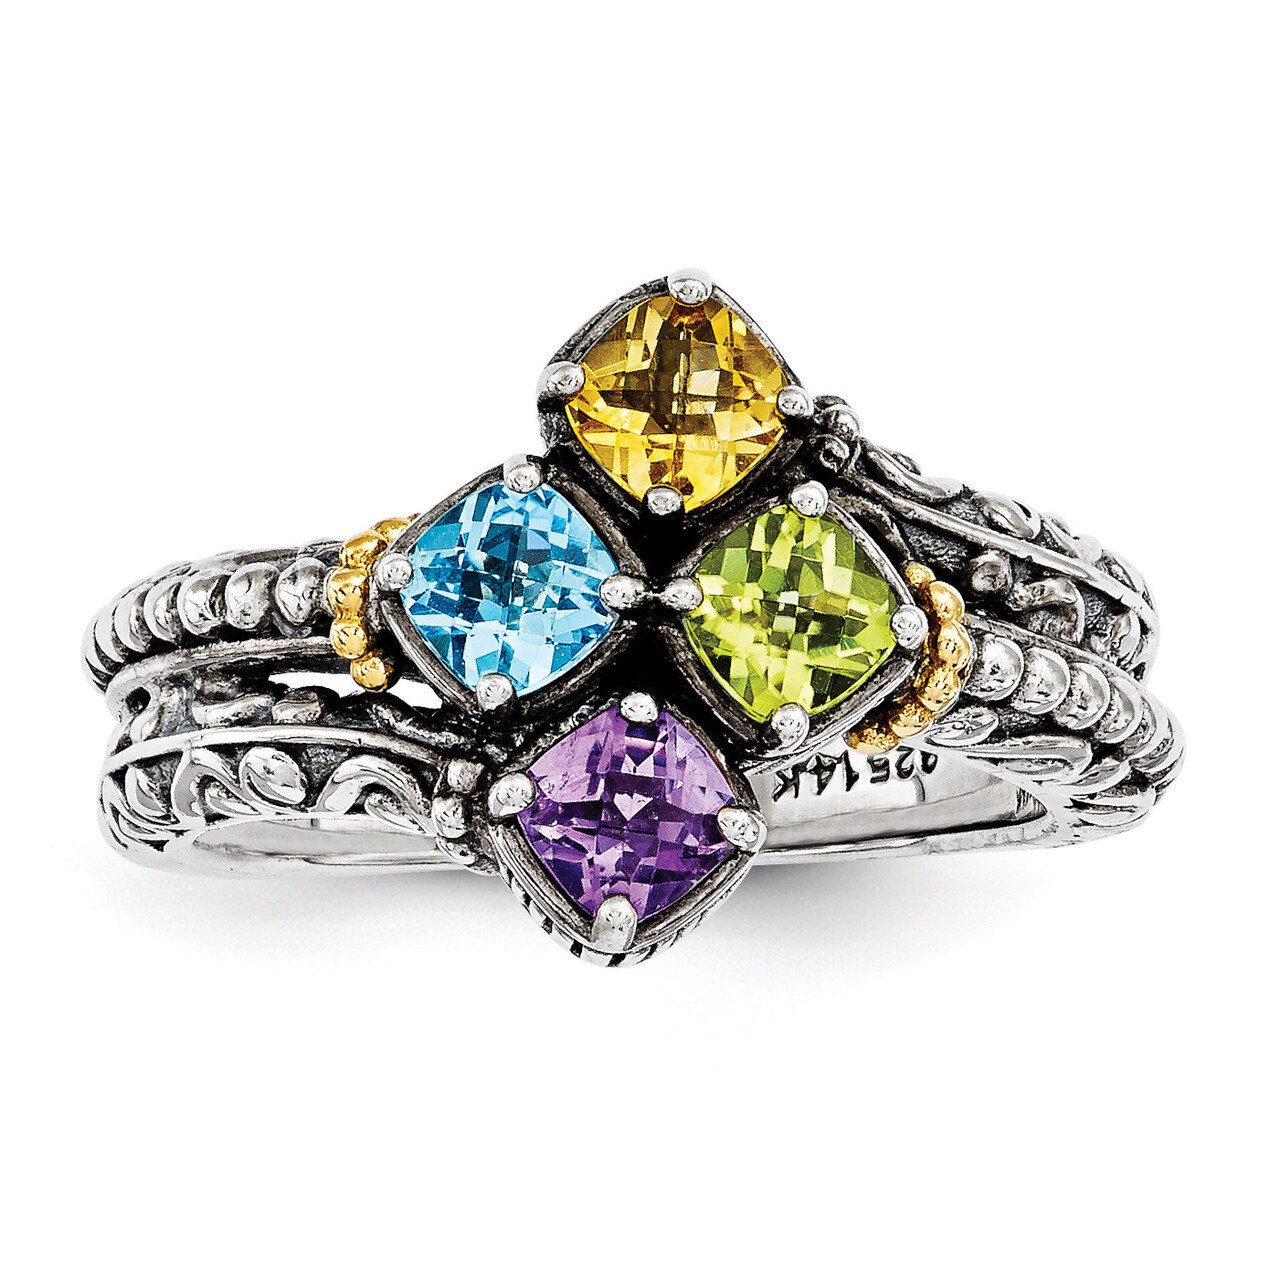 4 Birthstones & 14k Four-stone Mother's Ring Sterling Silver QMR10/4-10